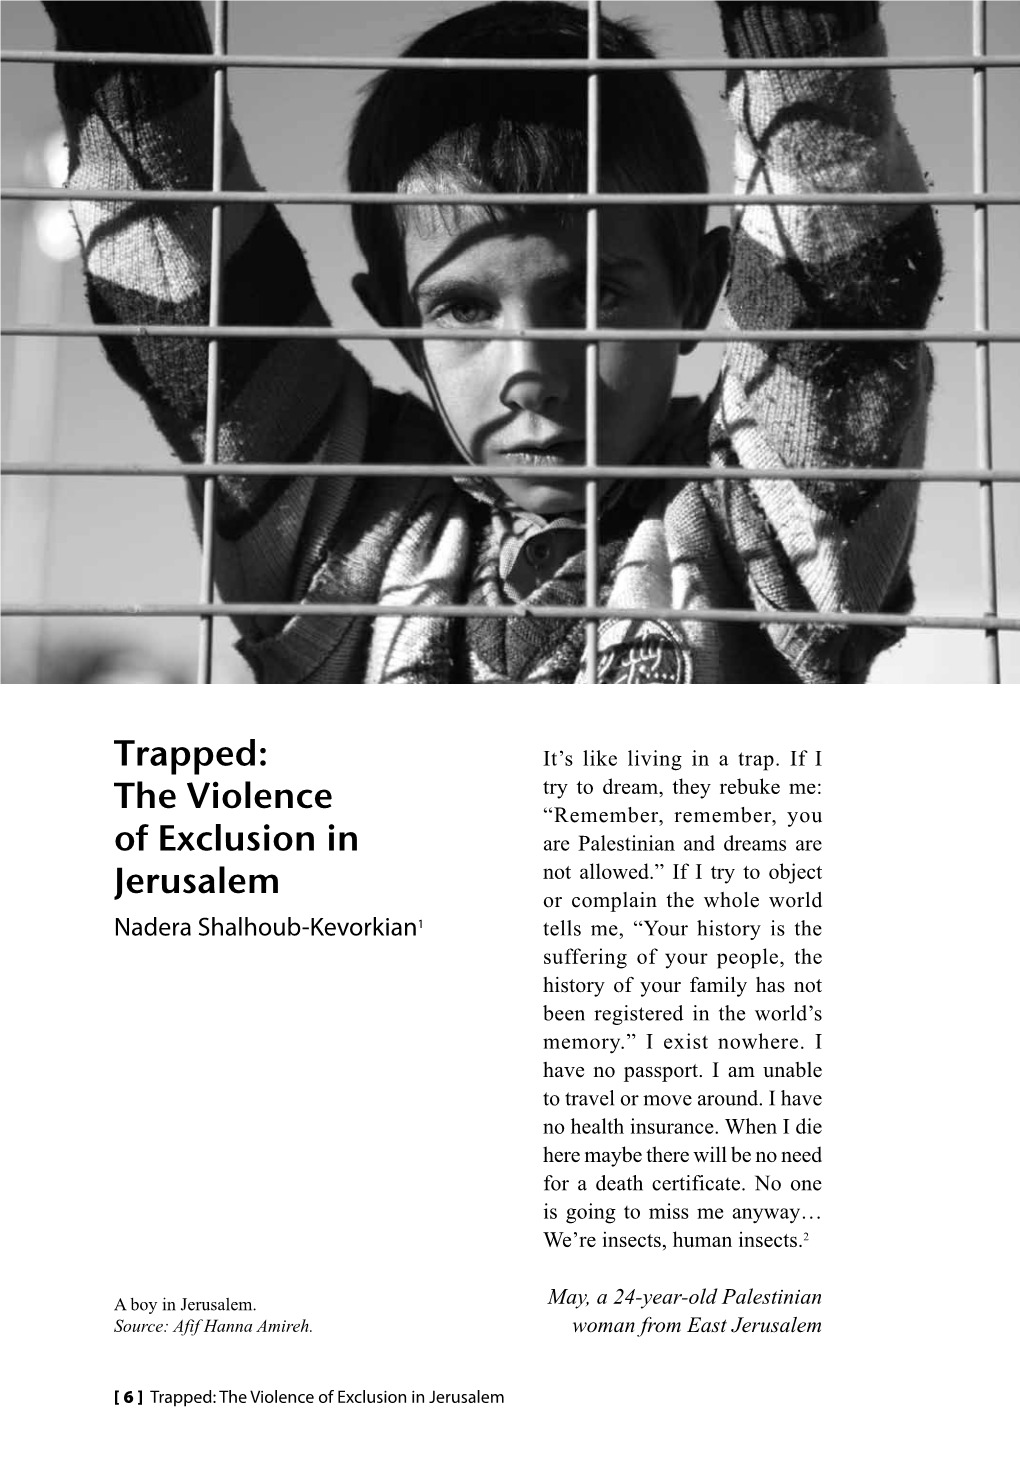 Trapped: the Violence of Exclusion in Jerusalem